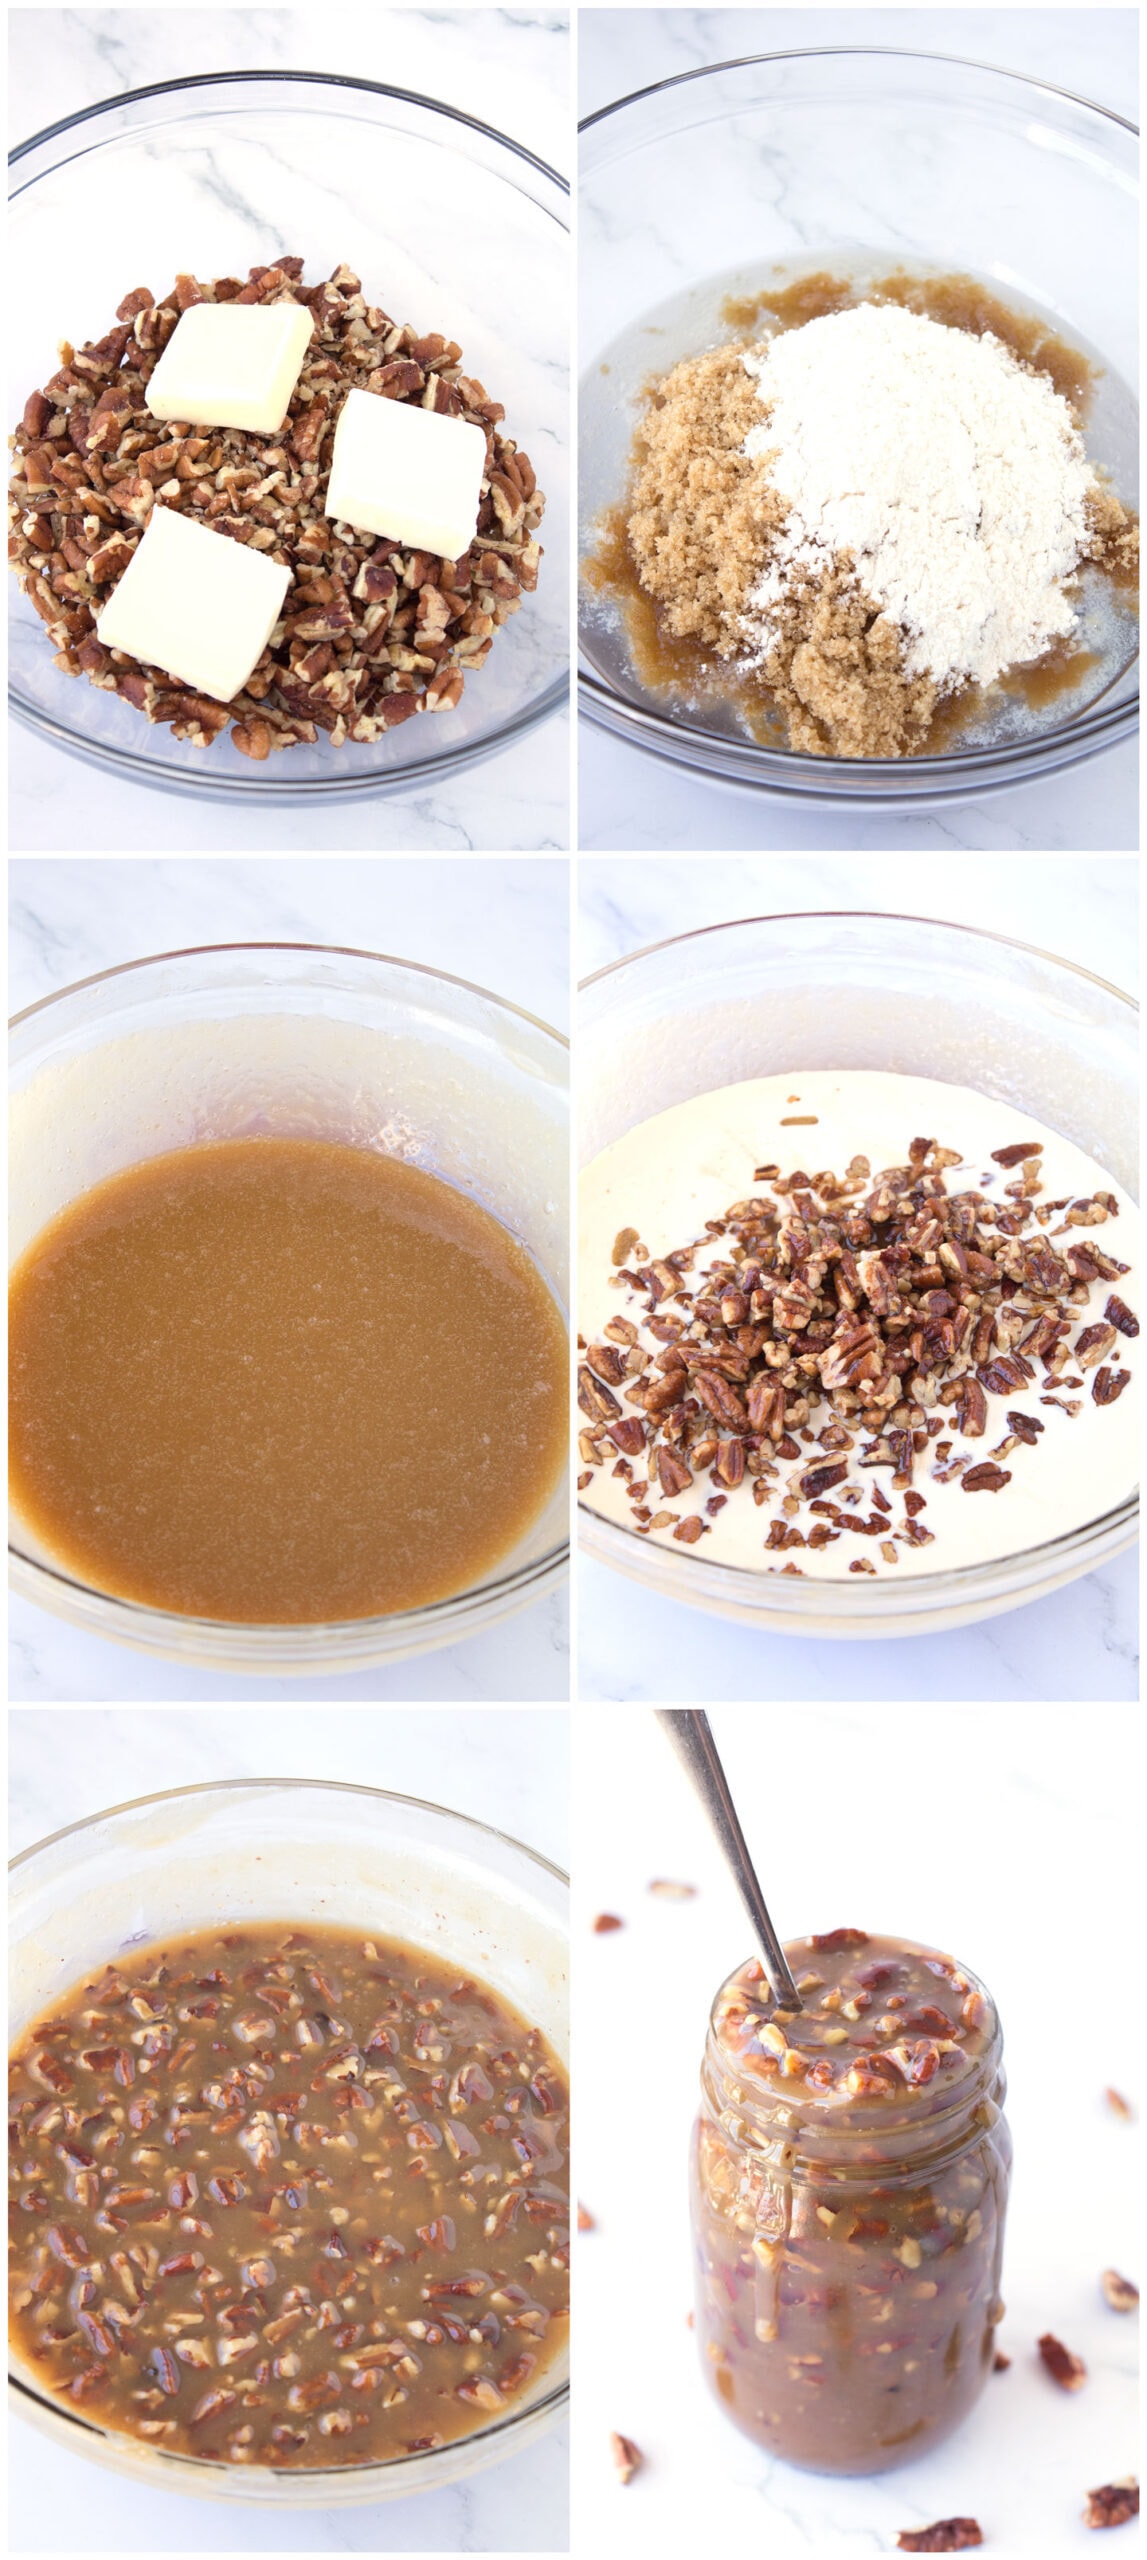 6 steps to make caramel sauce in microwave